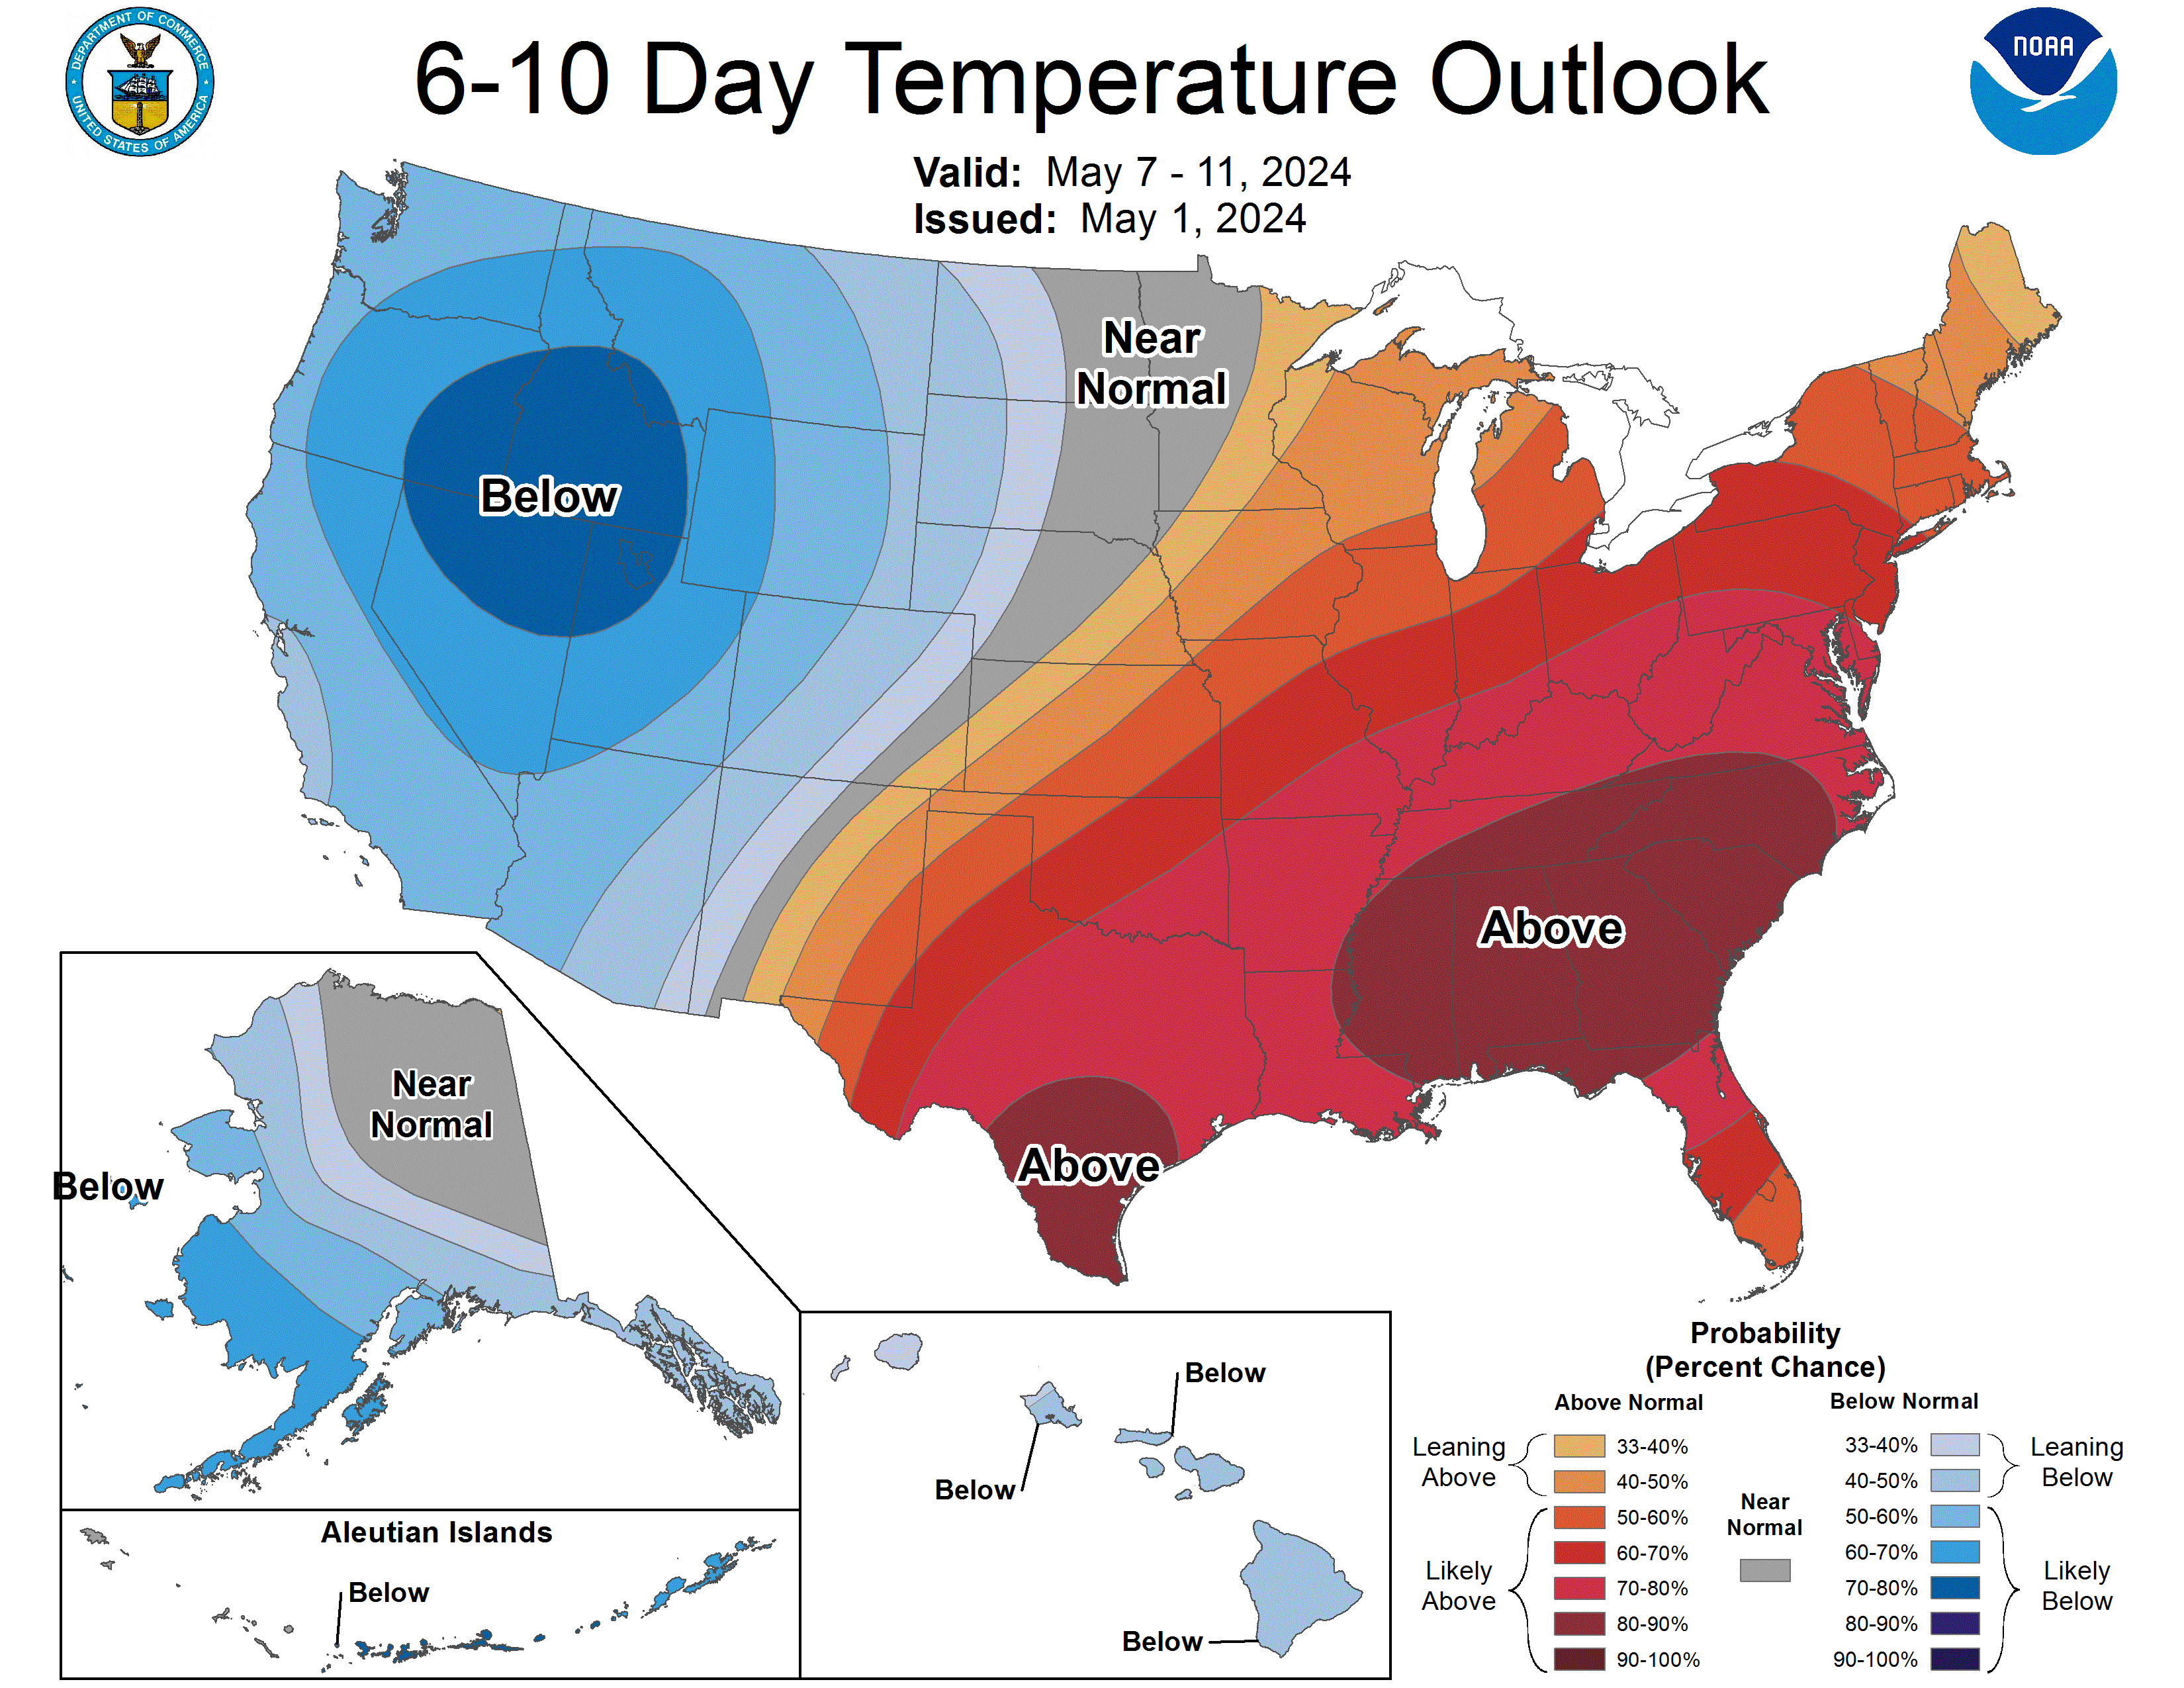 6-10 day temperature outlook for the US. Image: NOAA Today 